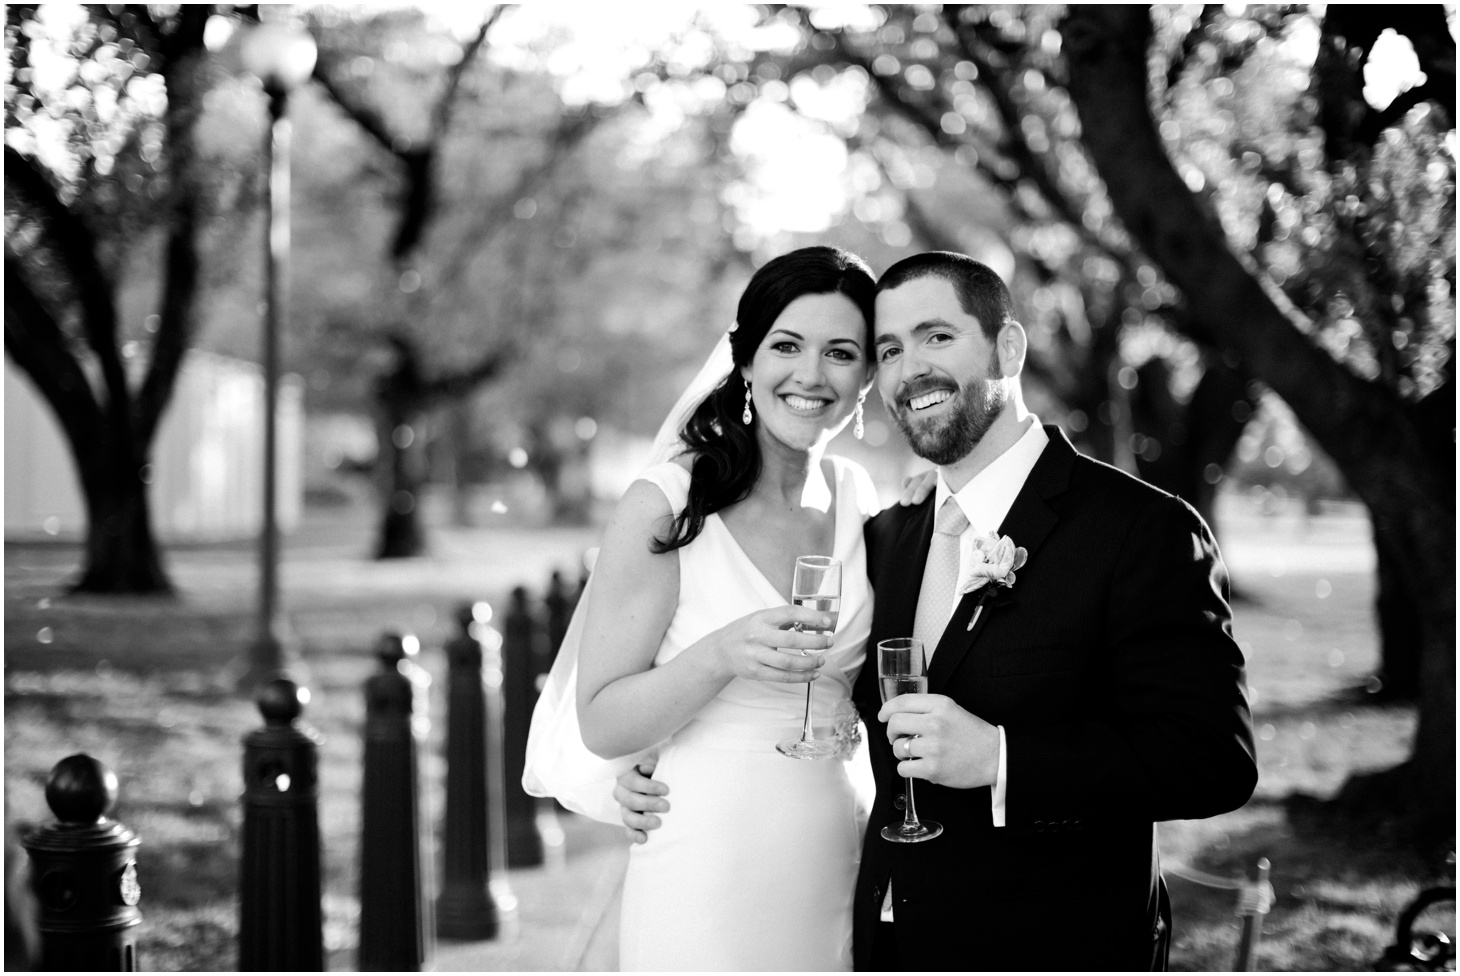 Mikey & Megan, Downtown DC Wedding at National Museum of Women in the Arts by Sarah Bradshaw Photography_0035.jpg